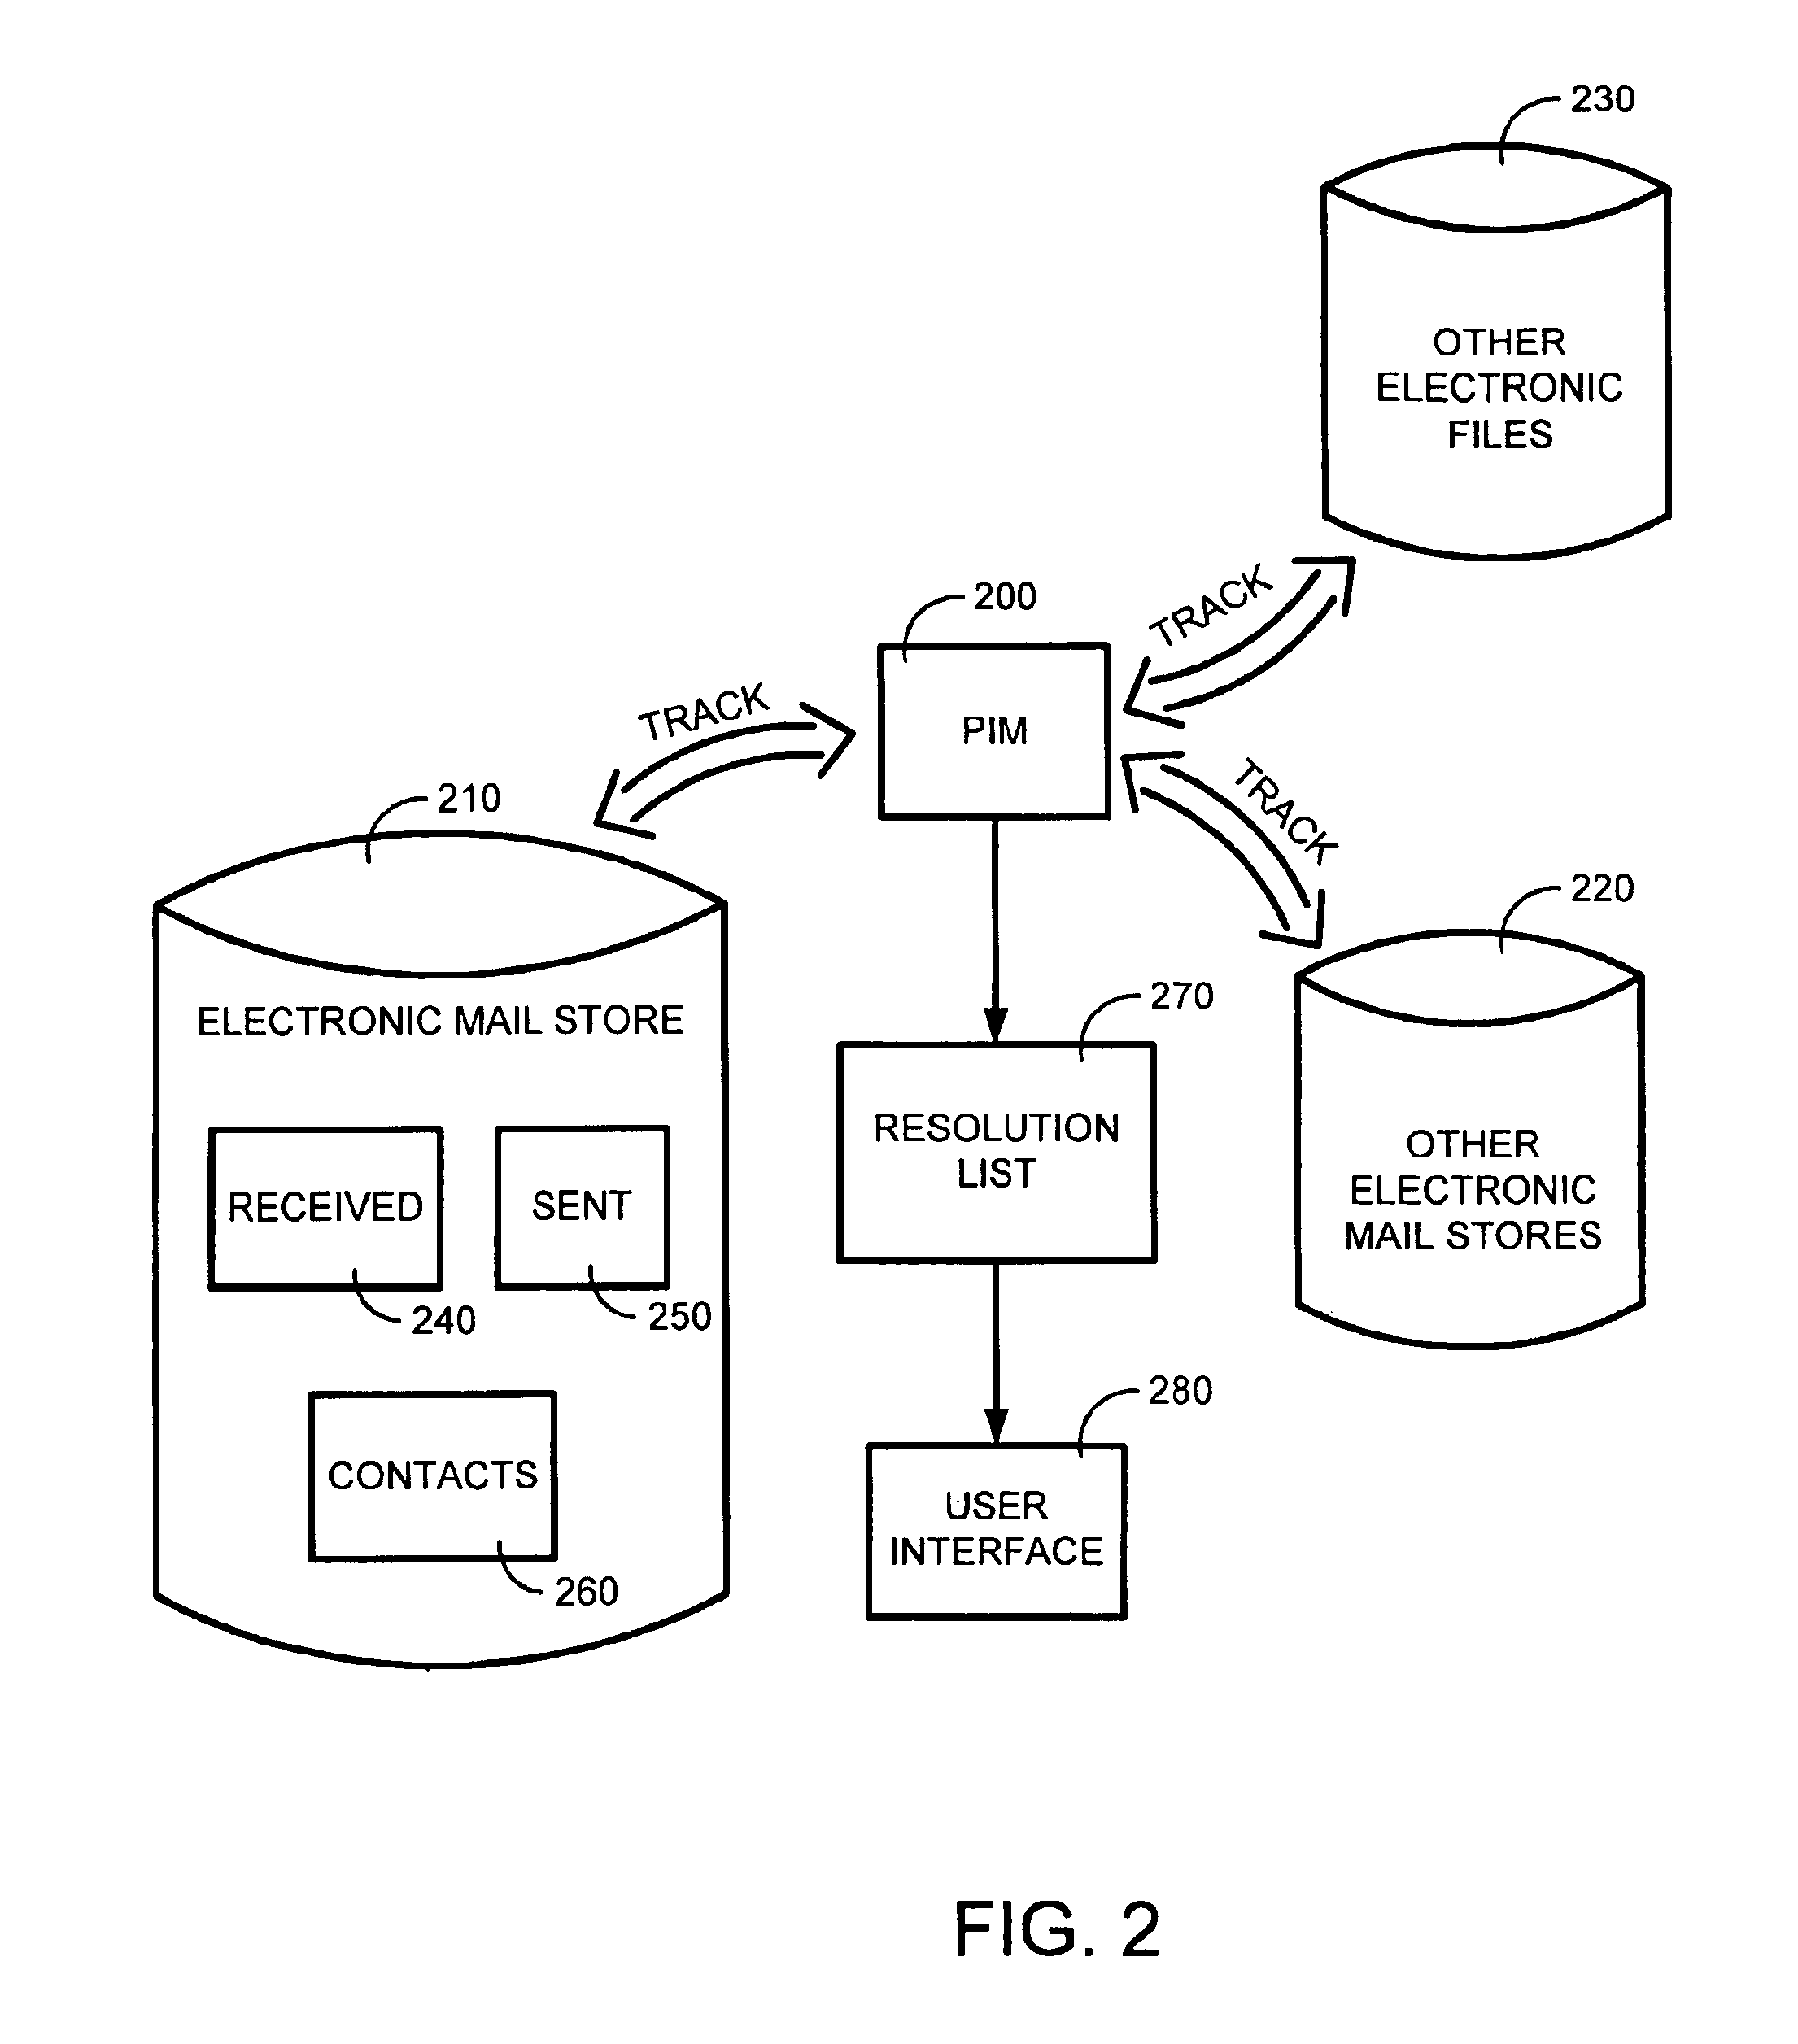 System and method for automatically populating a dynamic resolution list